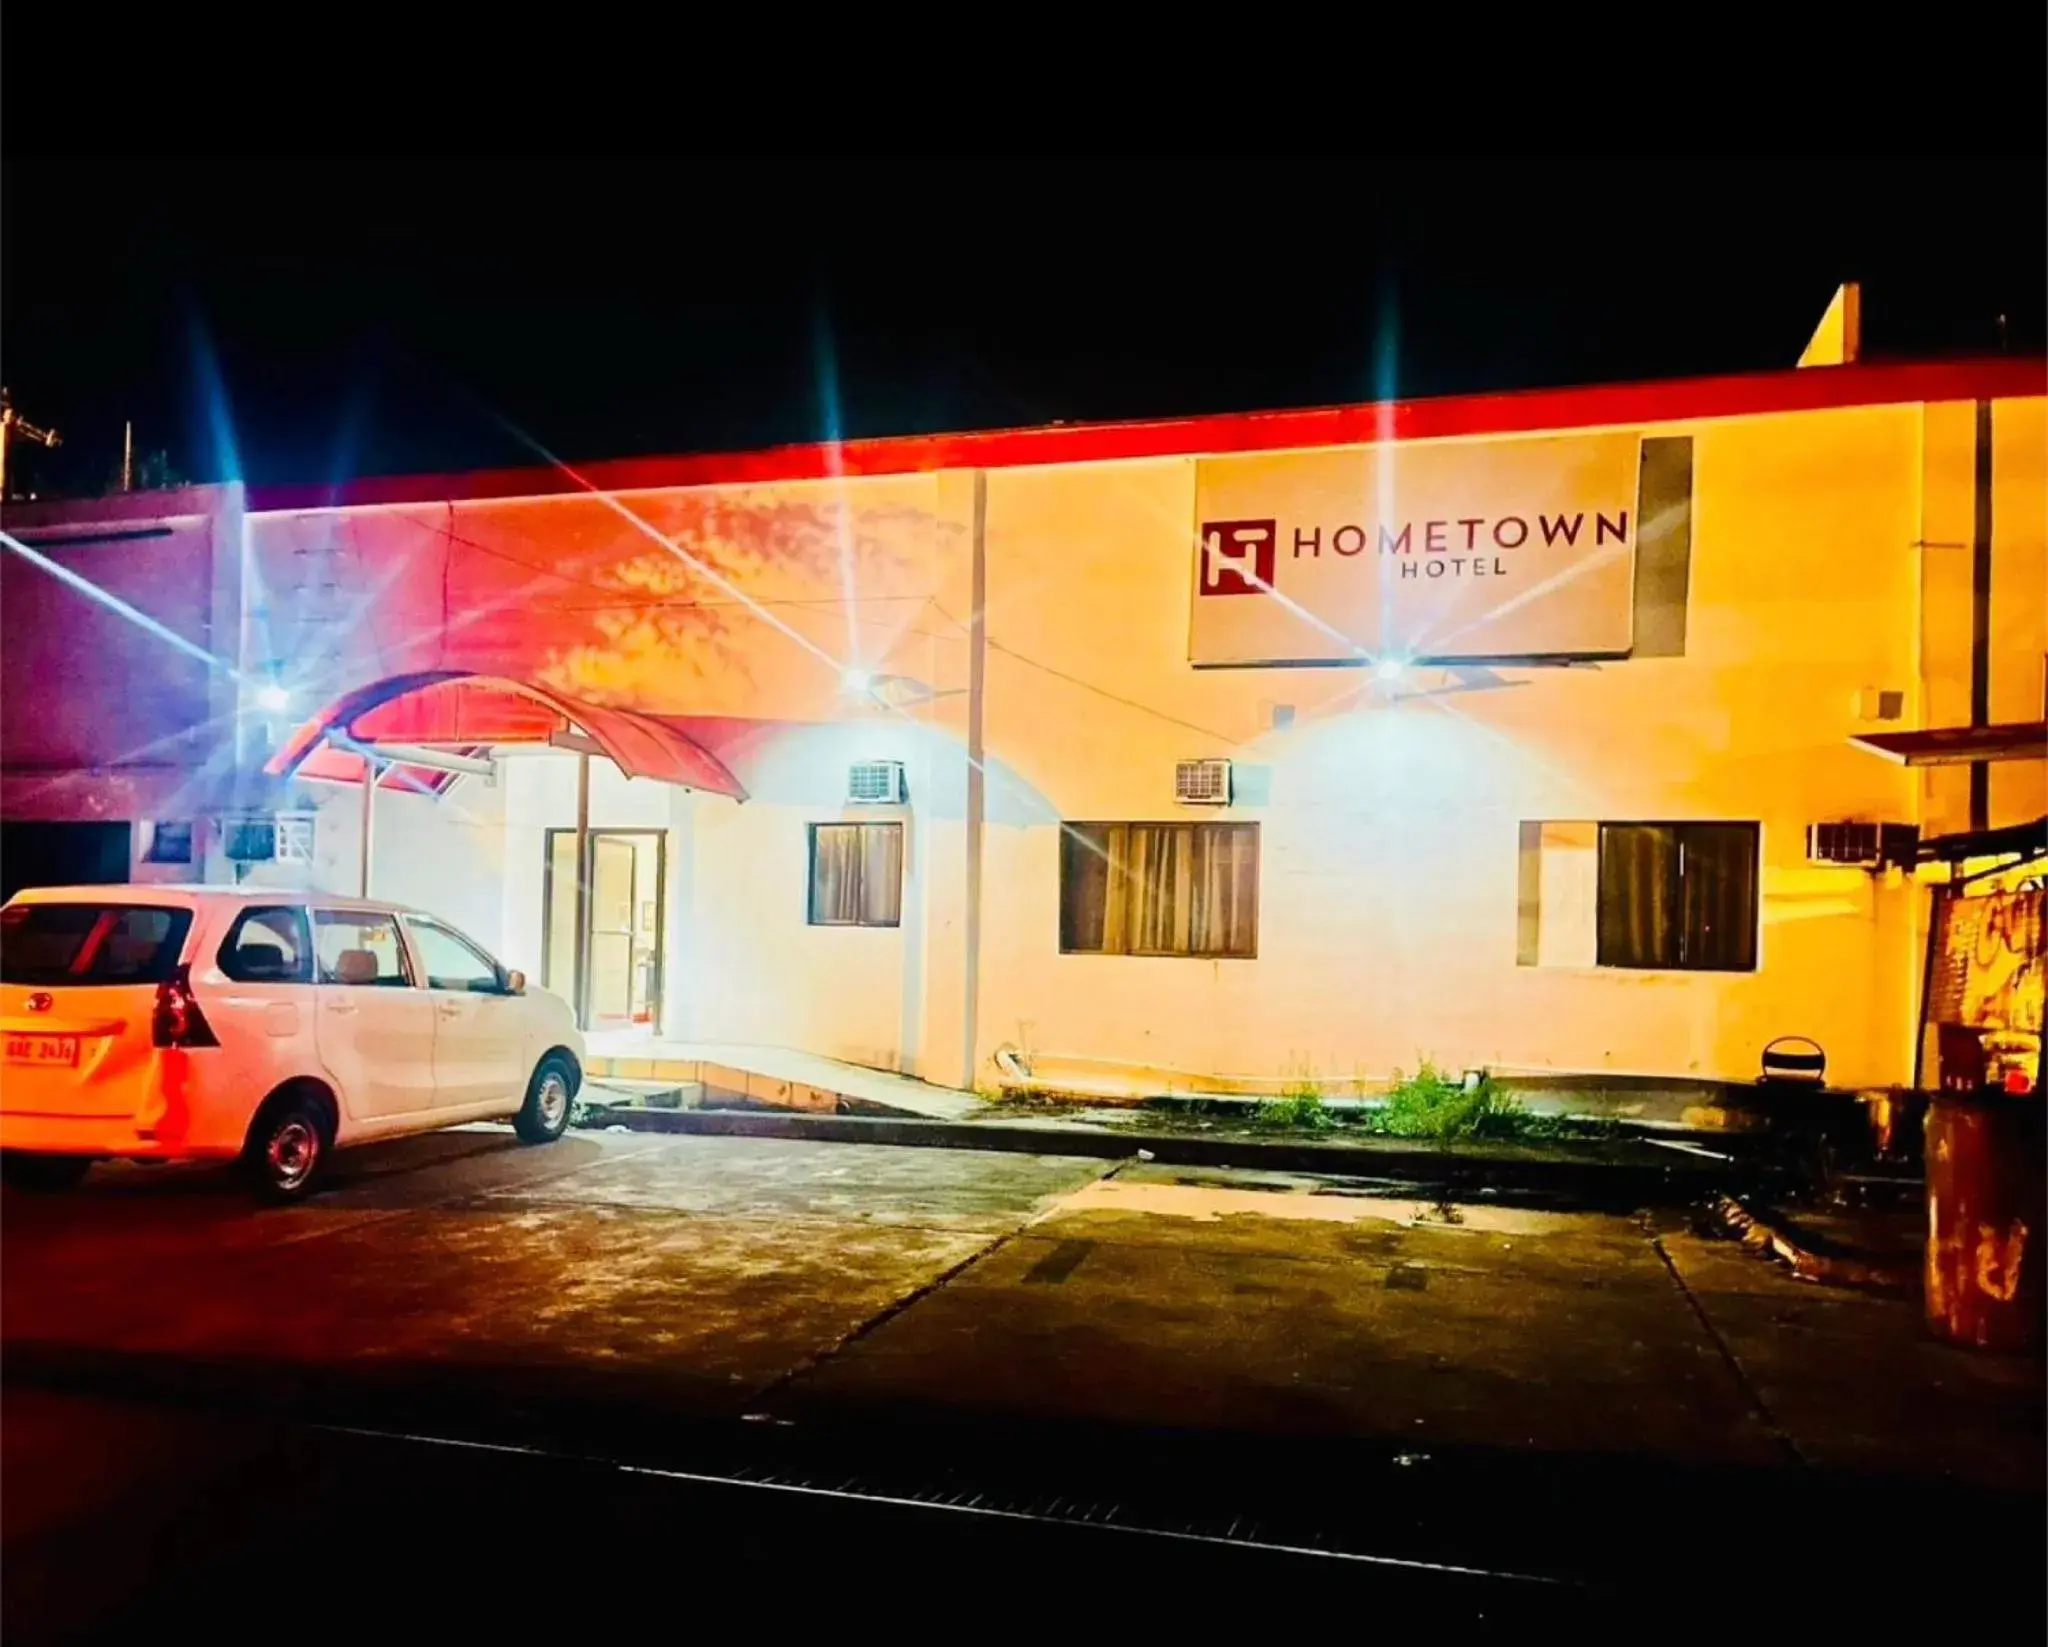 Property Building in Hometown Hotel Bacolod